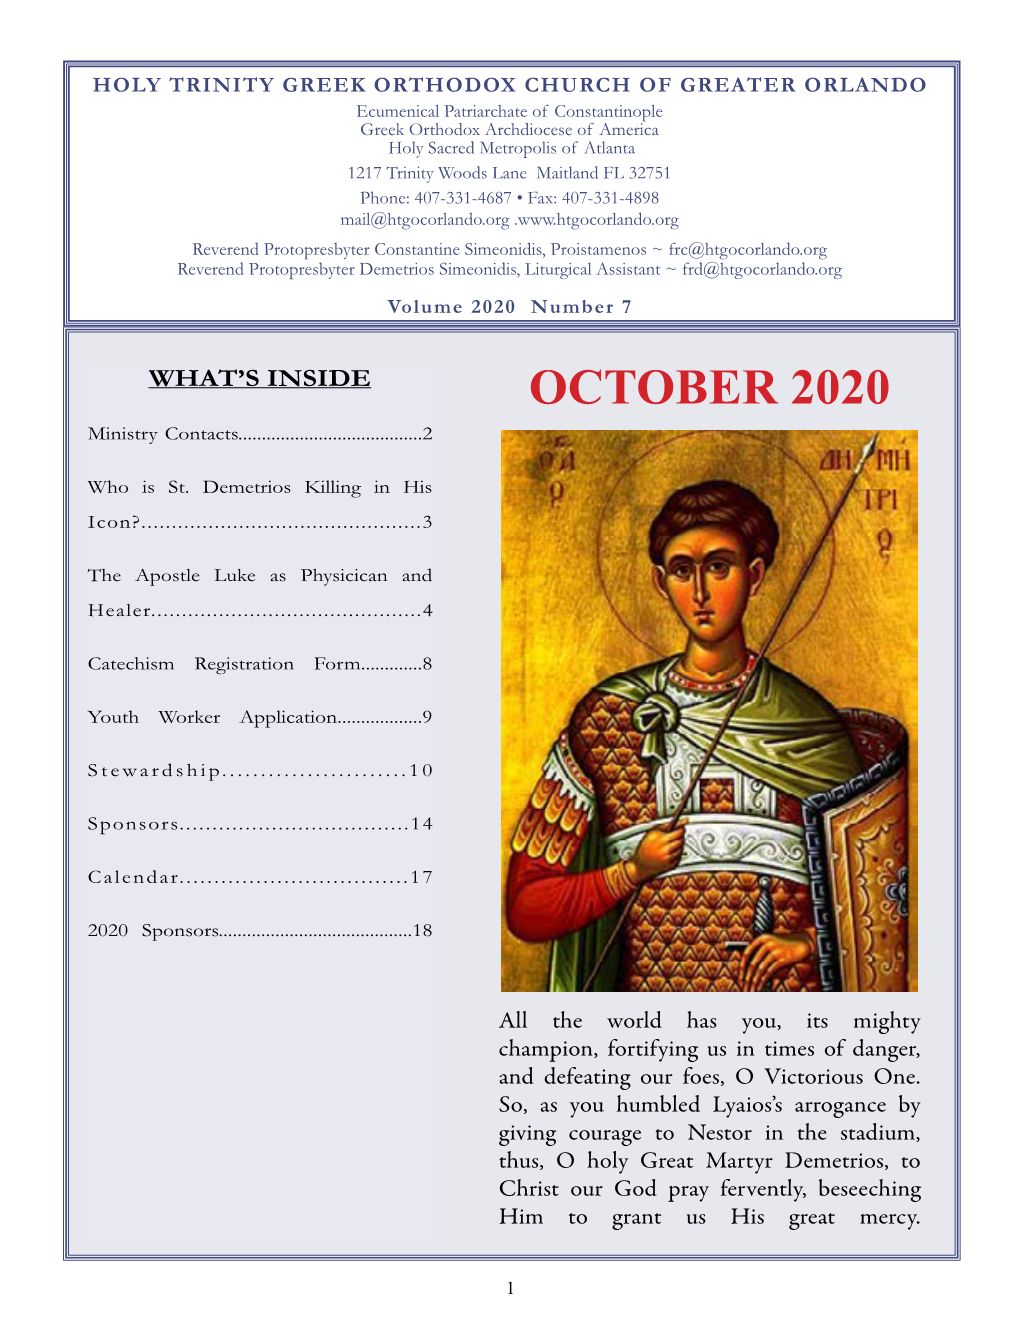 OCTOBER 2020 Ministry Contacts